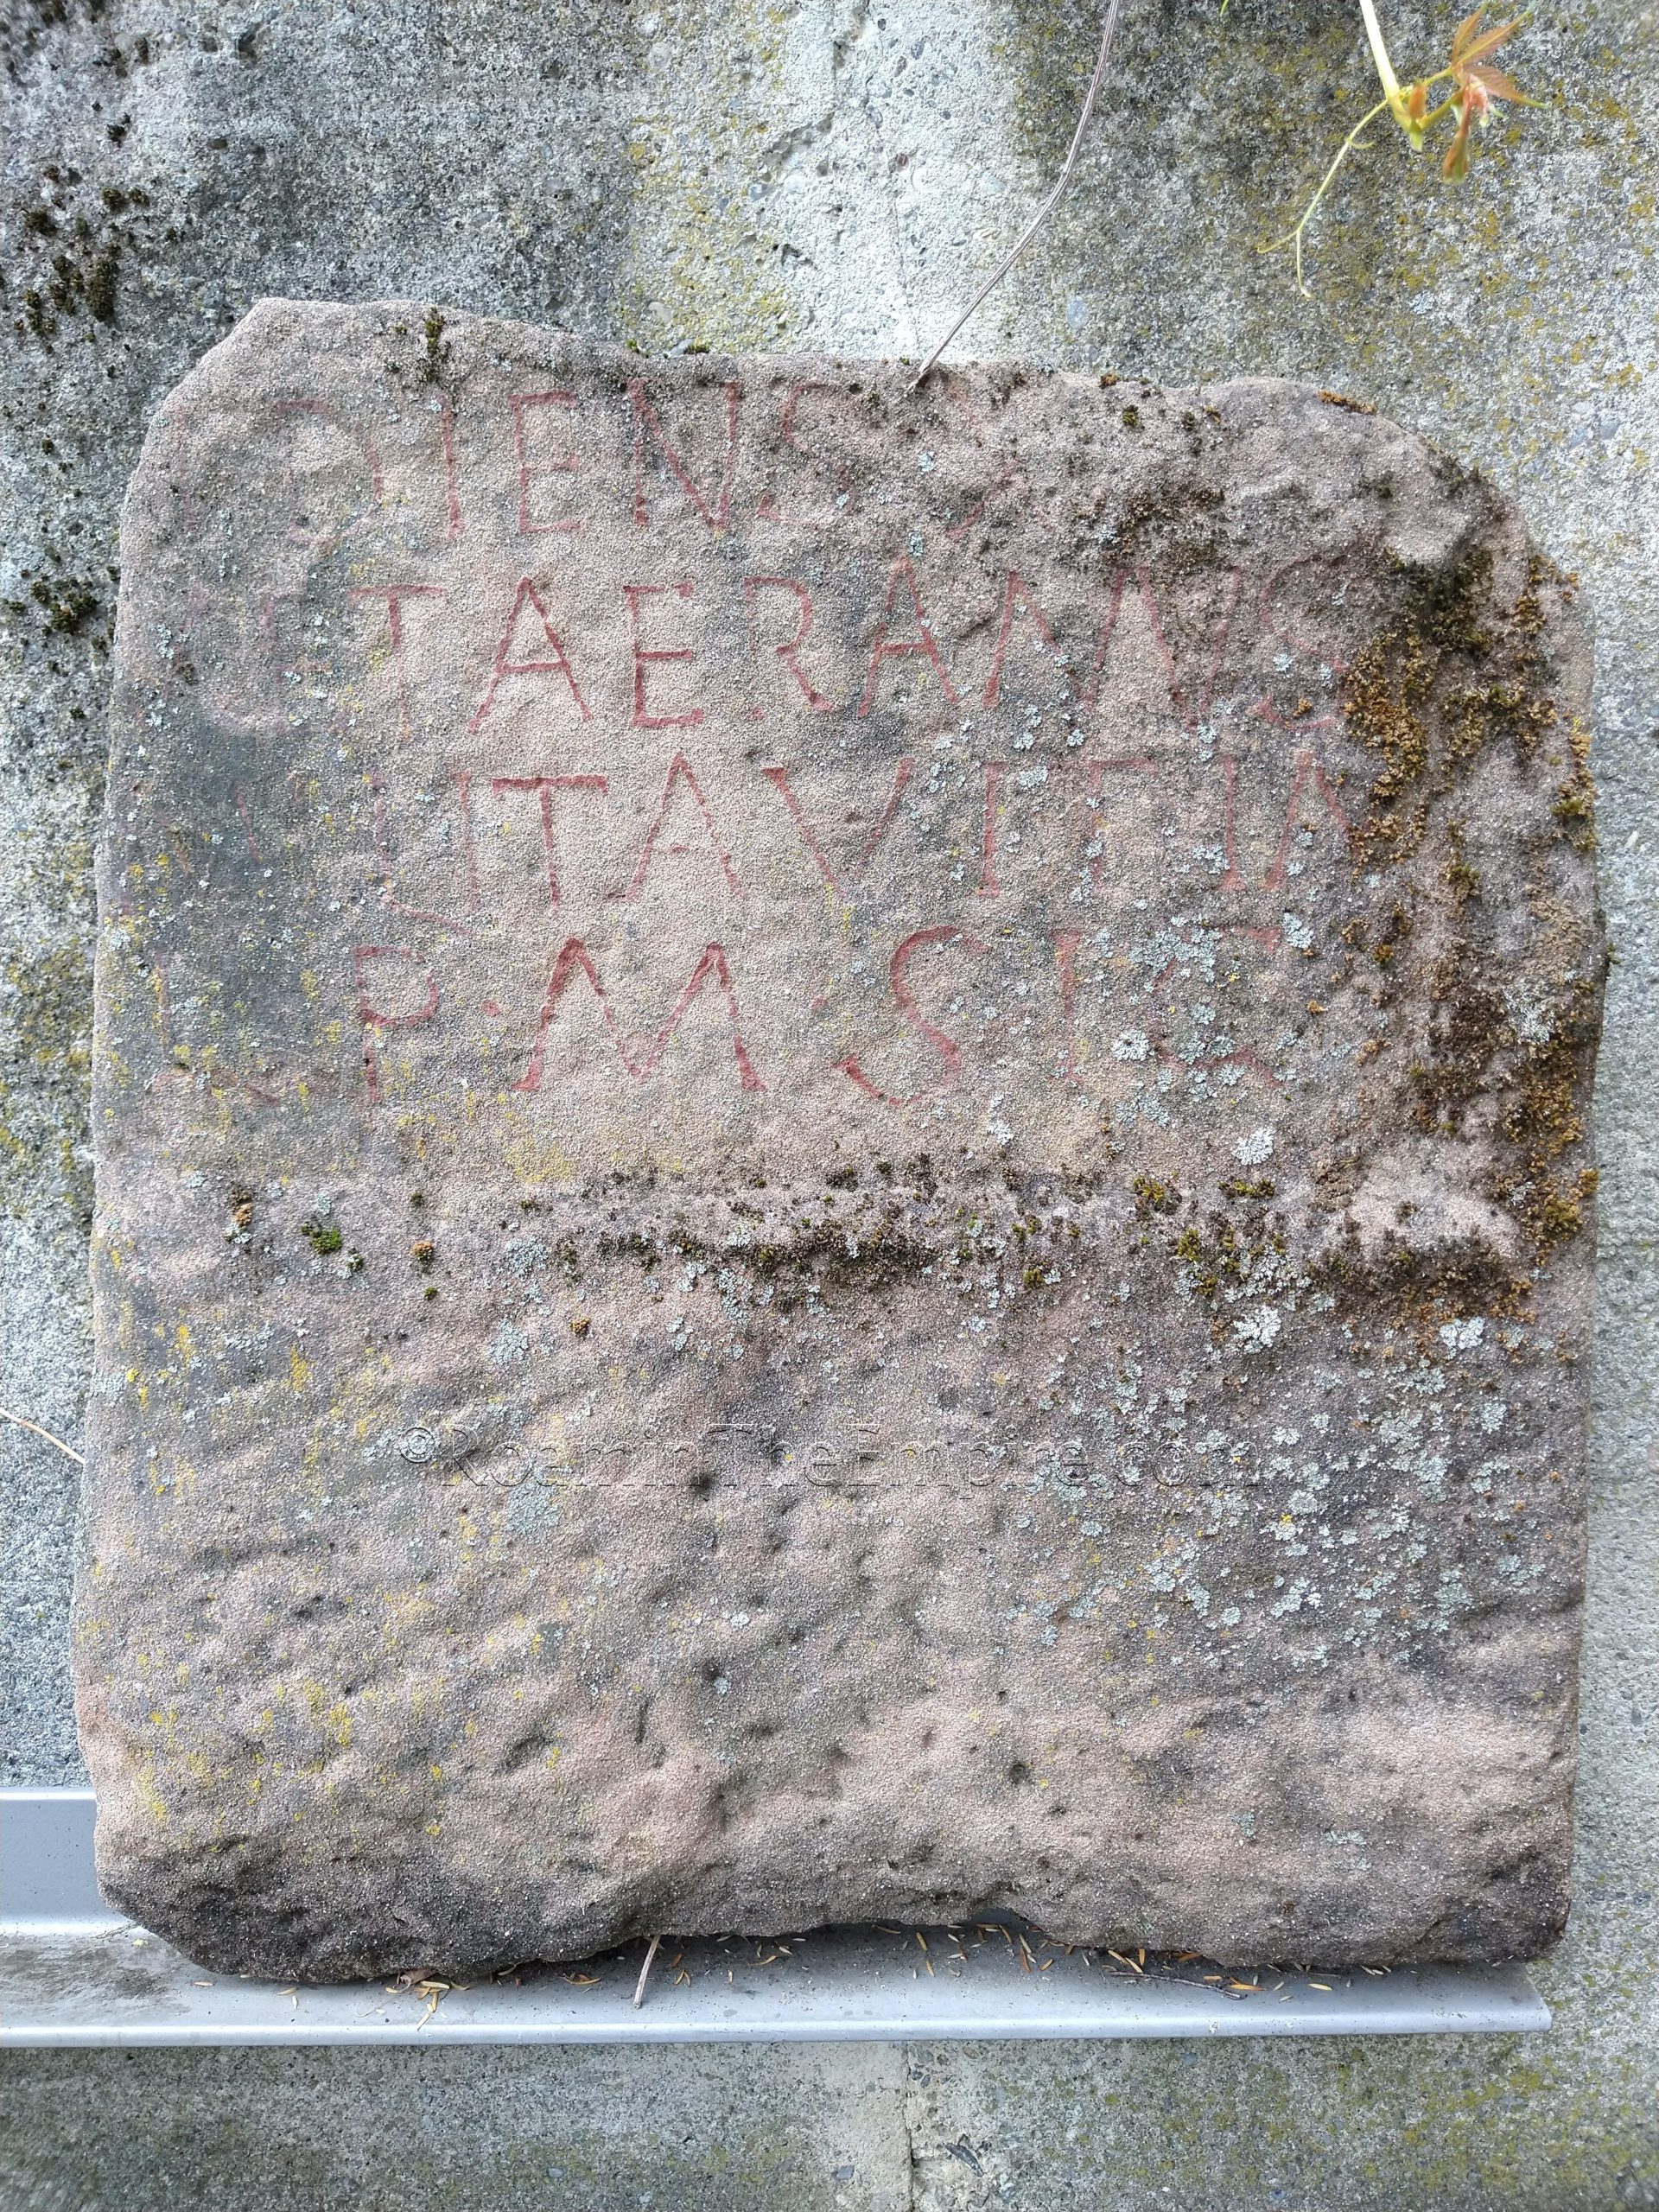 Partial funerary inscription of a soldier who served as the signifer (standard bearer) in Legio I Martia. Dated to the early 4th century CE, found reused in a medieval grave. From the lapidarium of the Museum and Römerhaus Augusta Raurica.